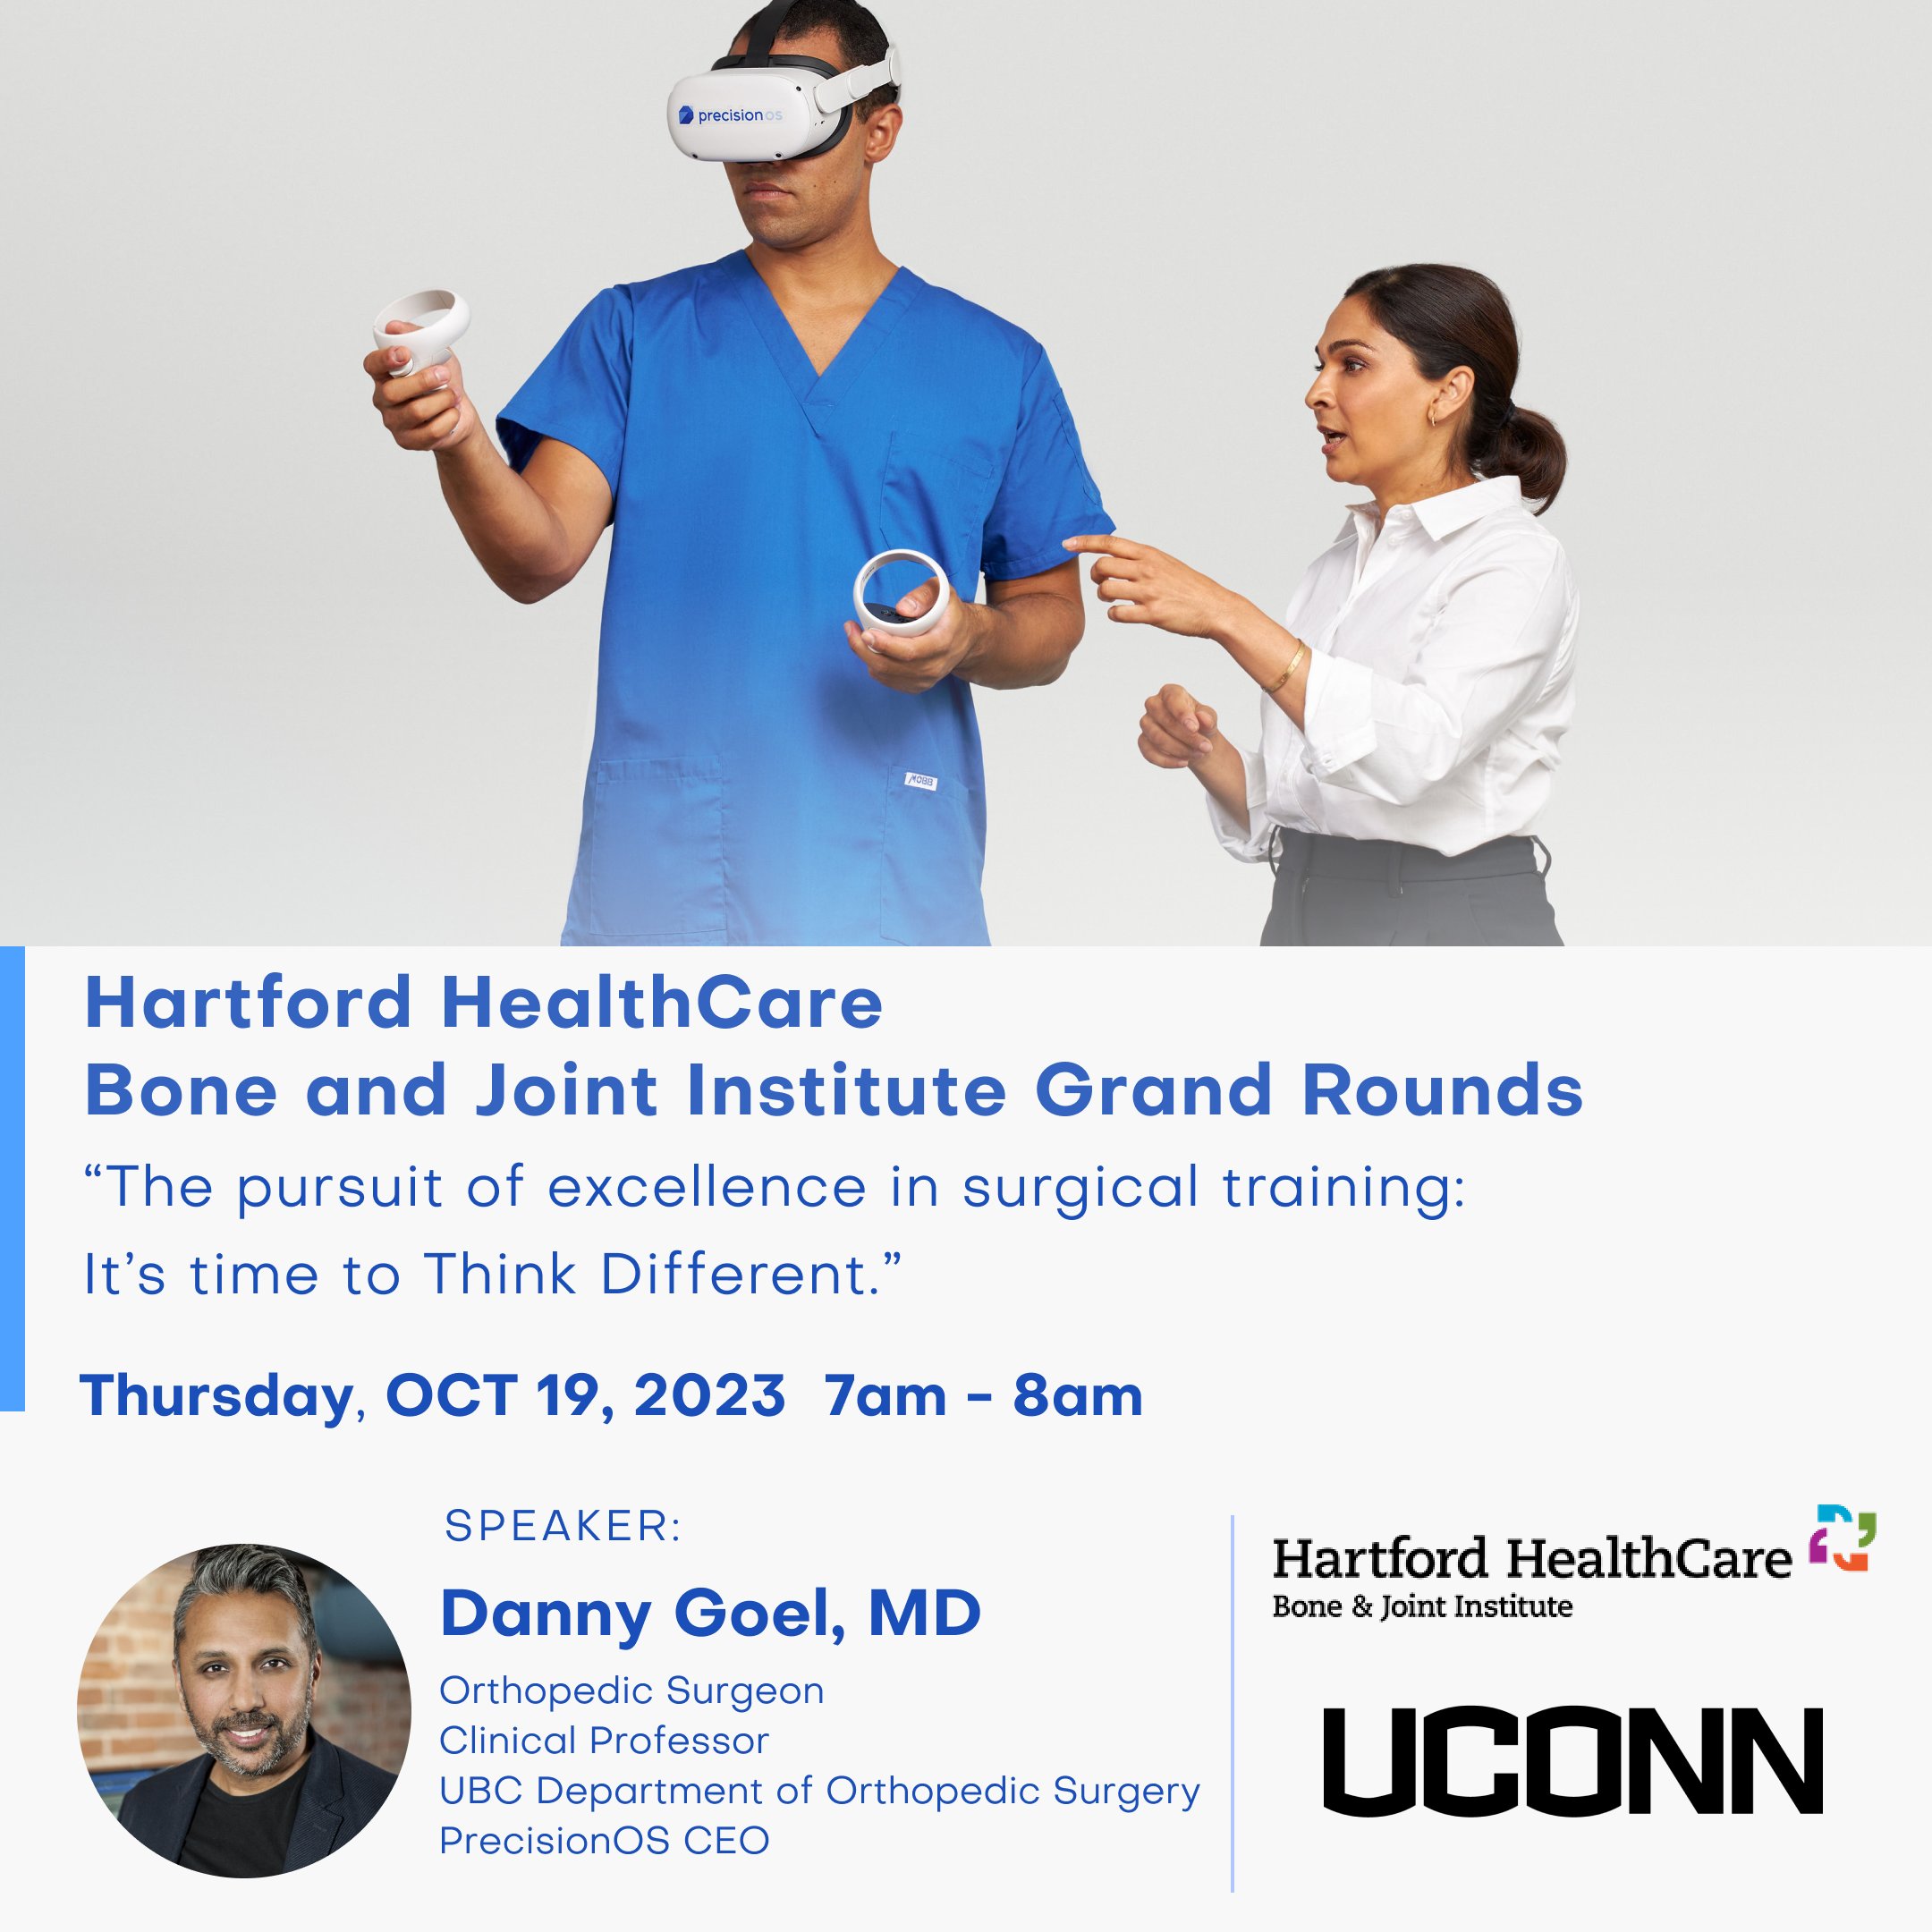 UConn Health is training orthopaedic surgery residents using VR